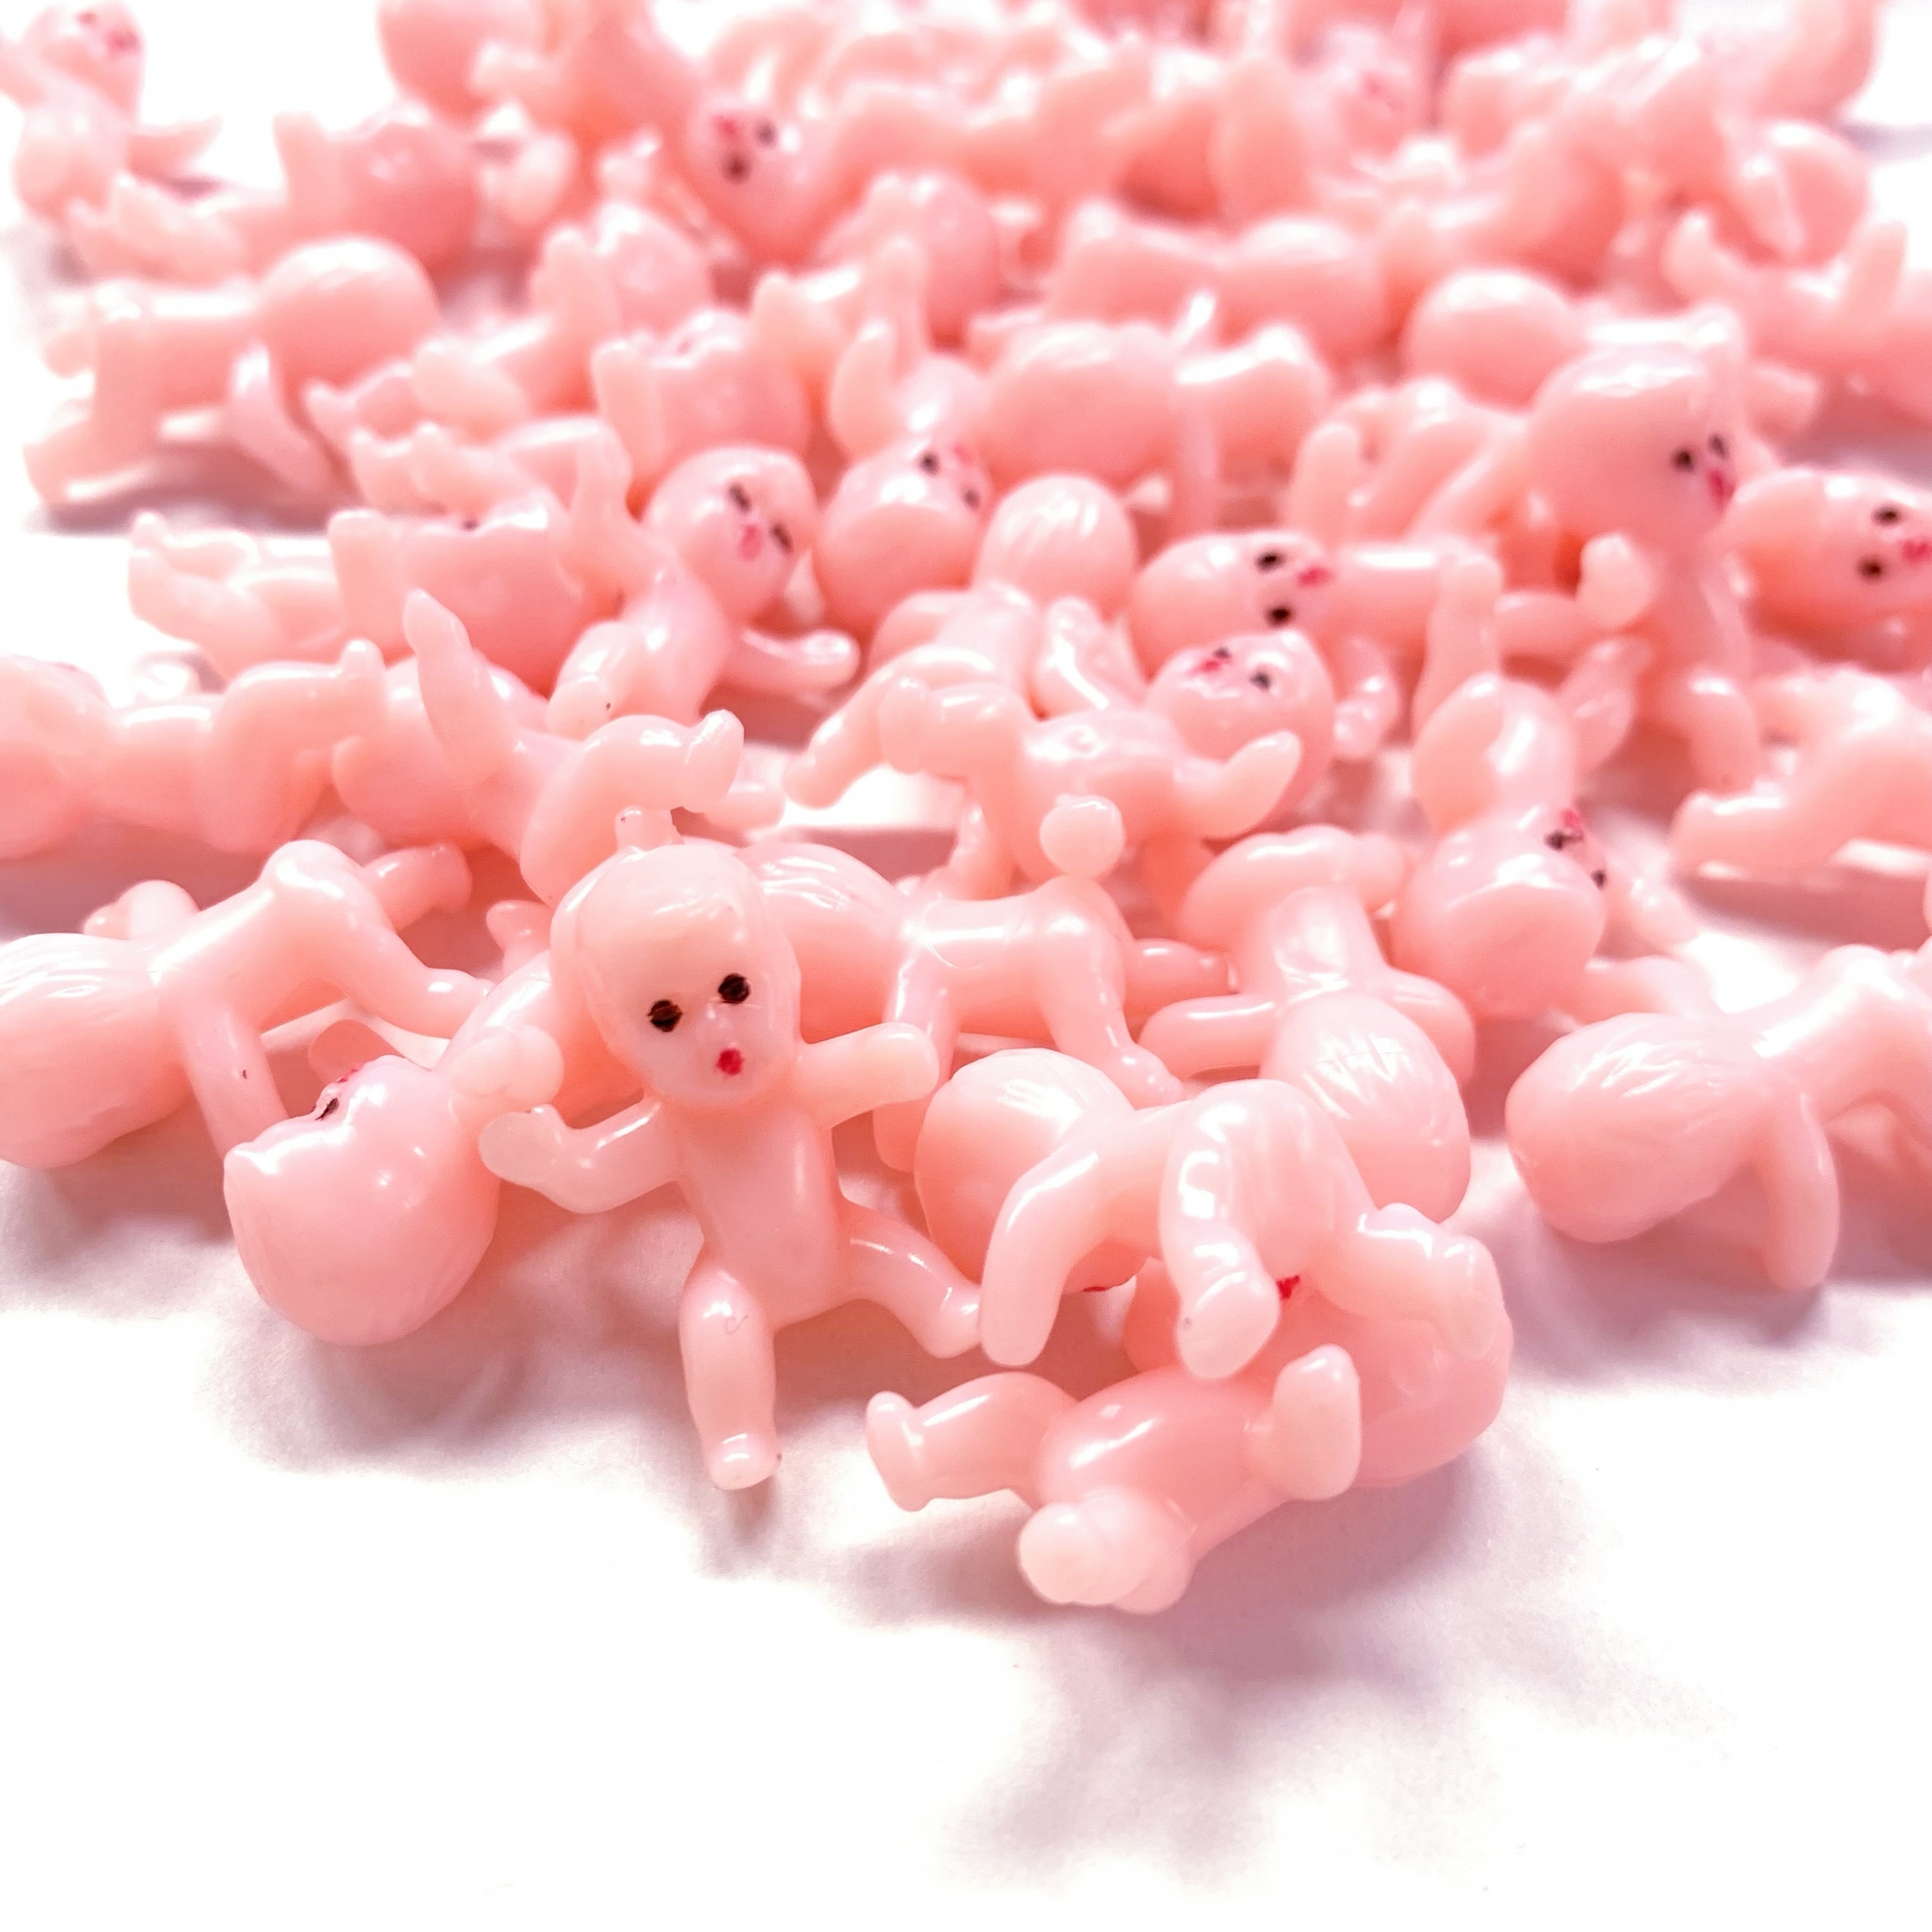 100 Mini Plastic Babies 10 Colors Tiny Baby Figurines for Baby